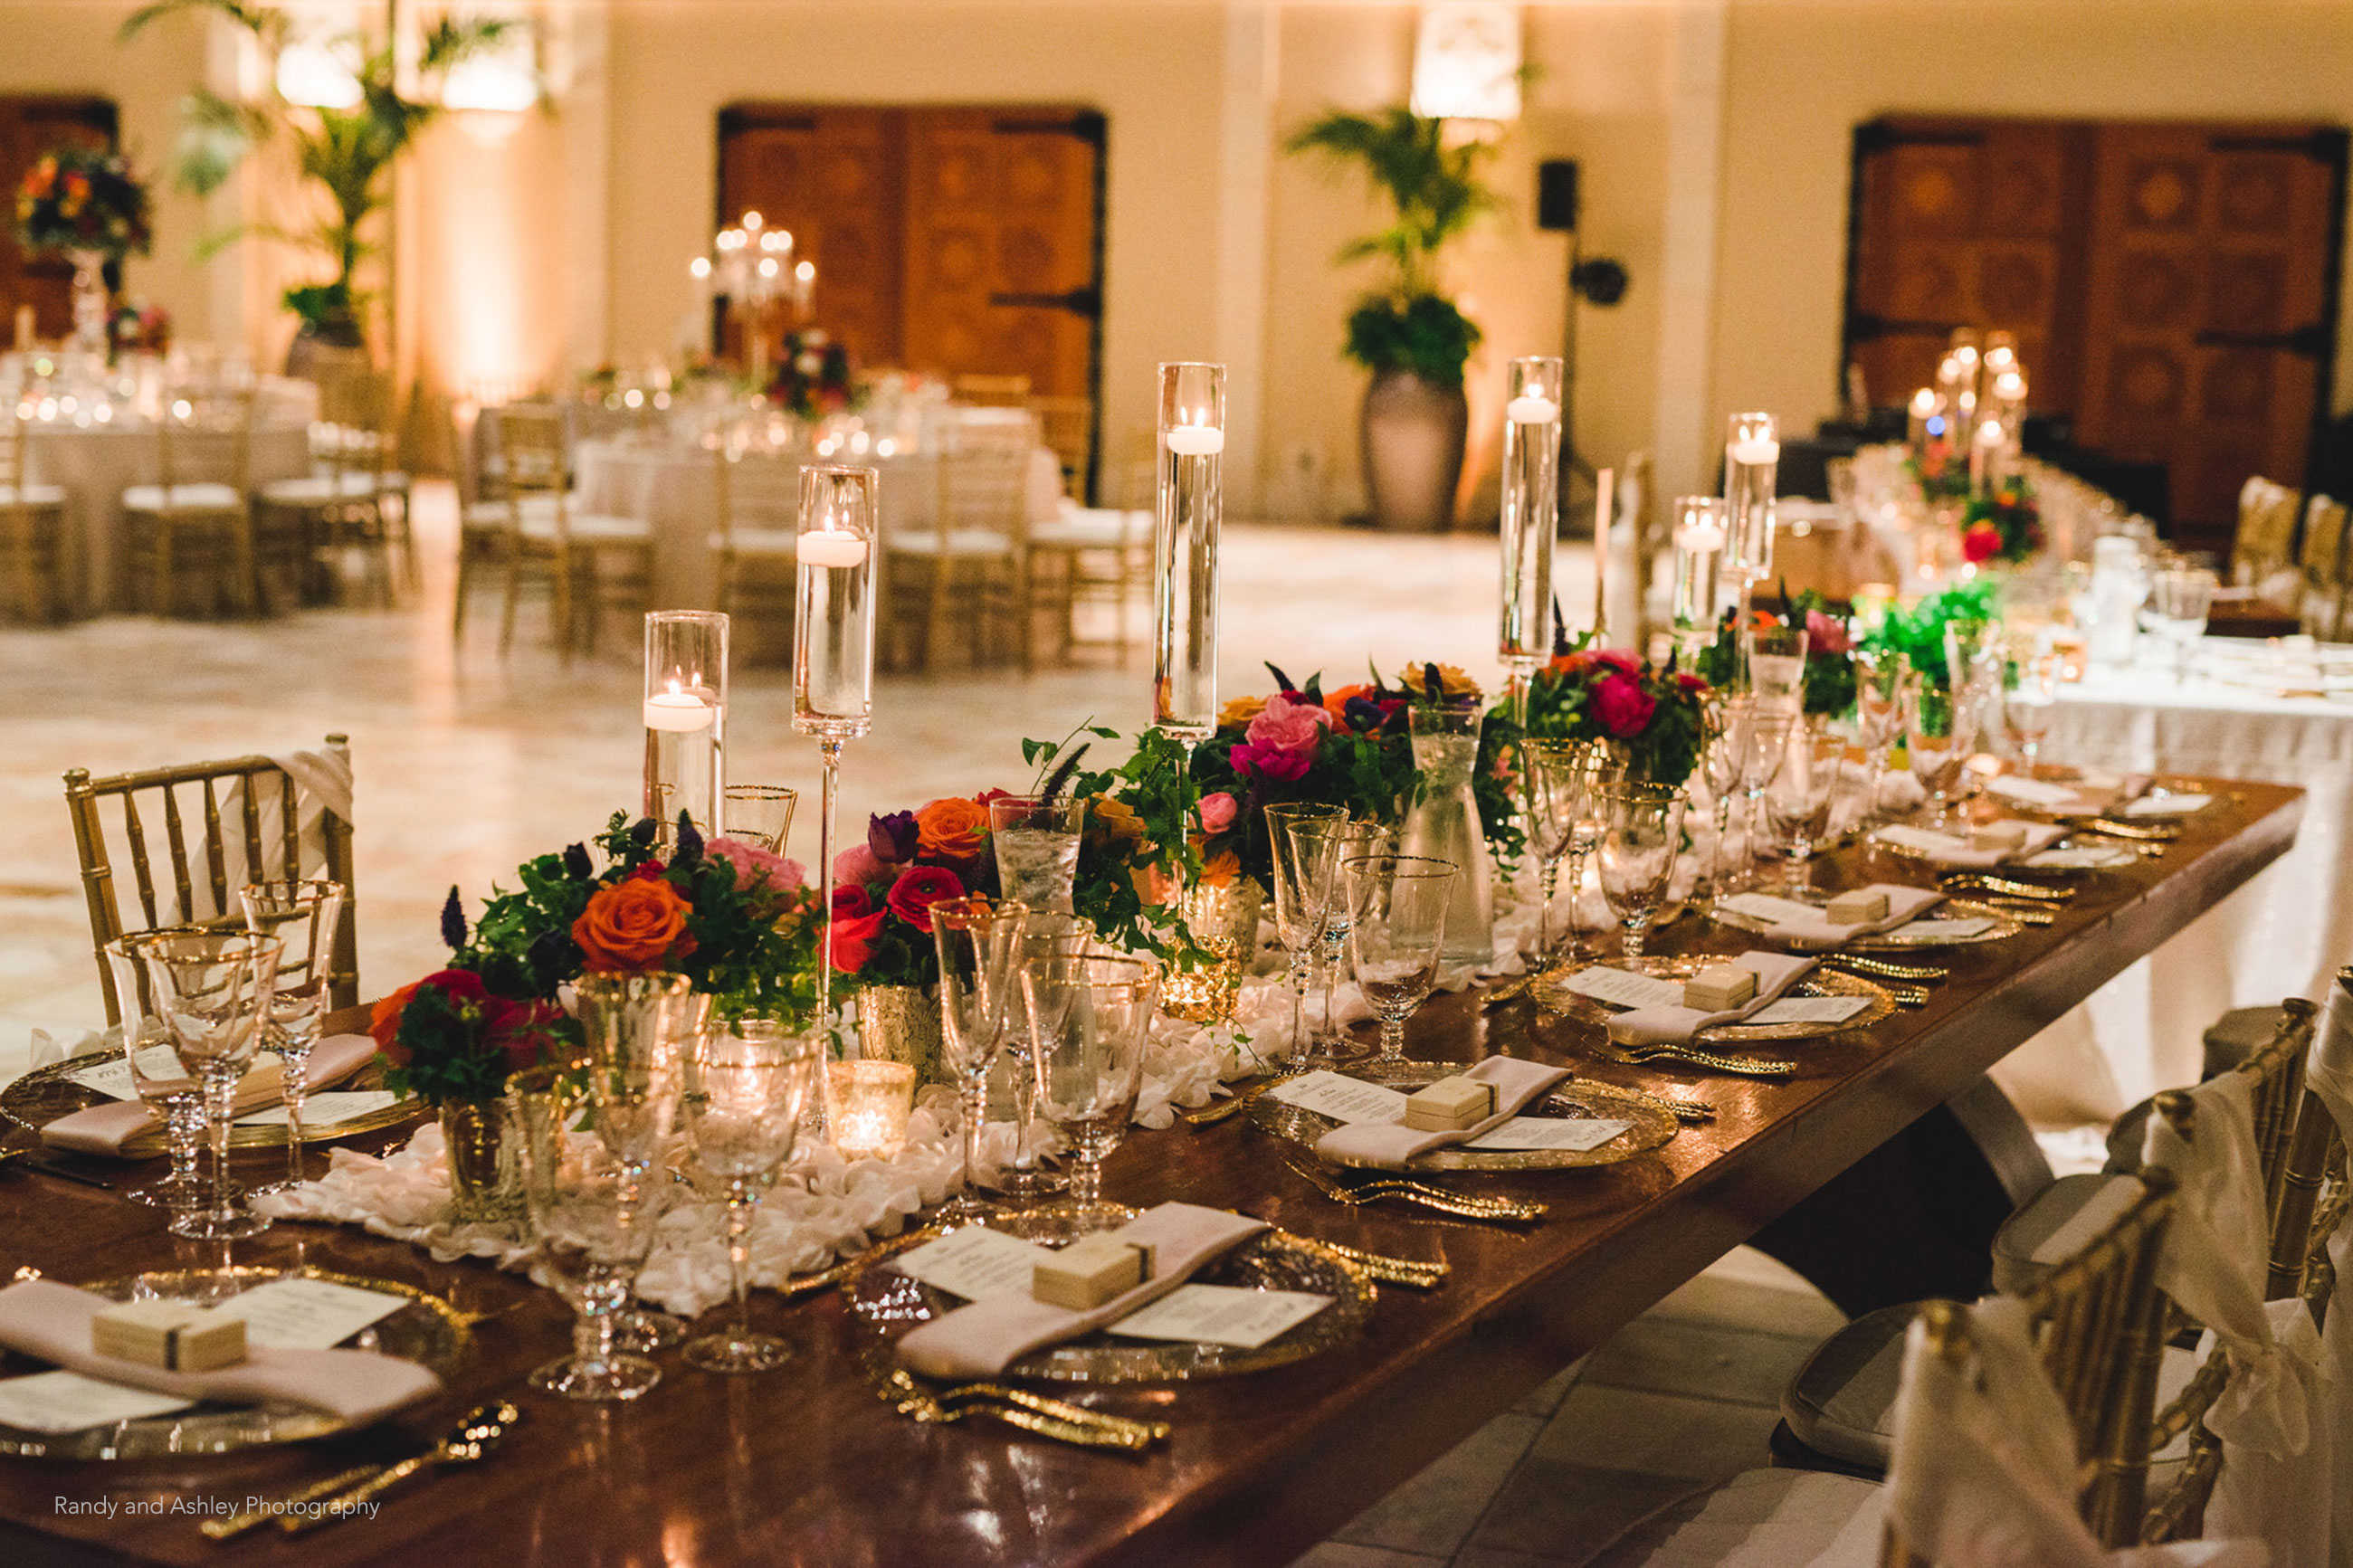 Elegant candlelit wedding reception table with gold and roses at Casa Real at Ruby Hill Winery (www.casarealevents.com).  Photo by: Randy and Ashley Photography; Florals: Enchantment Floral; Linens: Napa Valley Linen; Glassware, Flatware and Chargers: Pleasanton Rentals